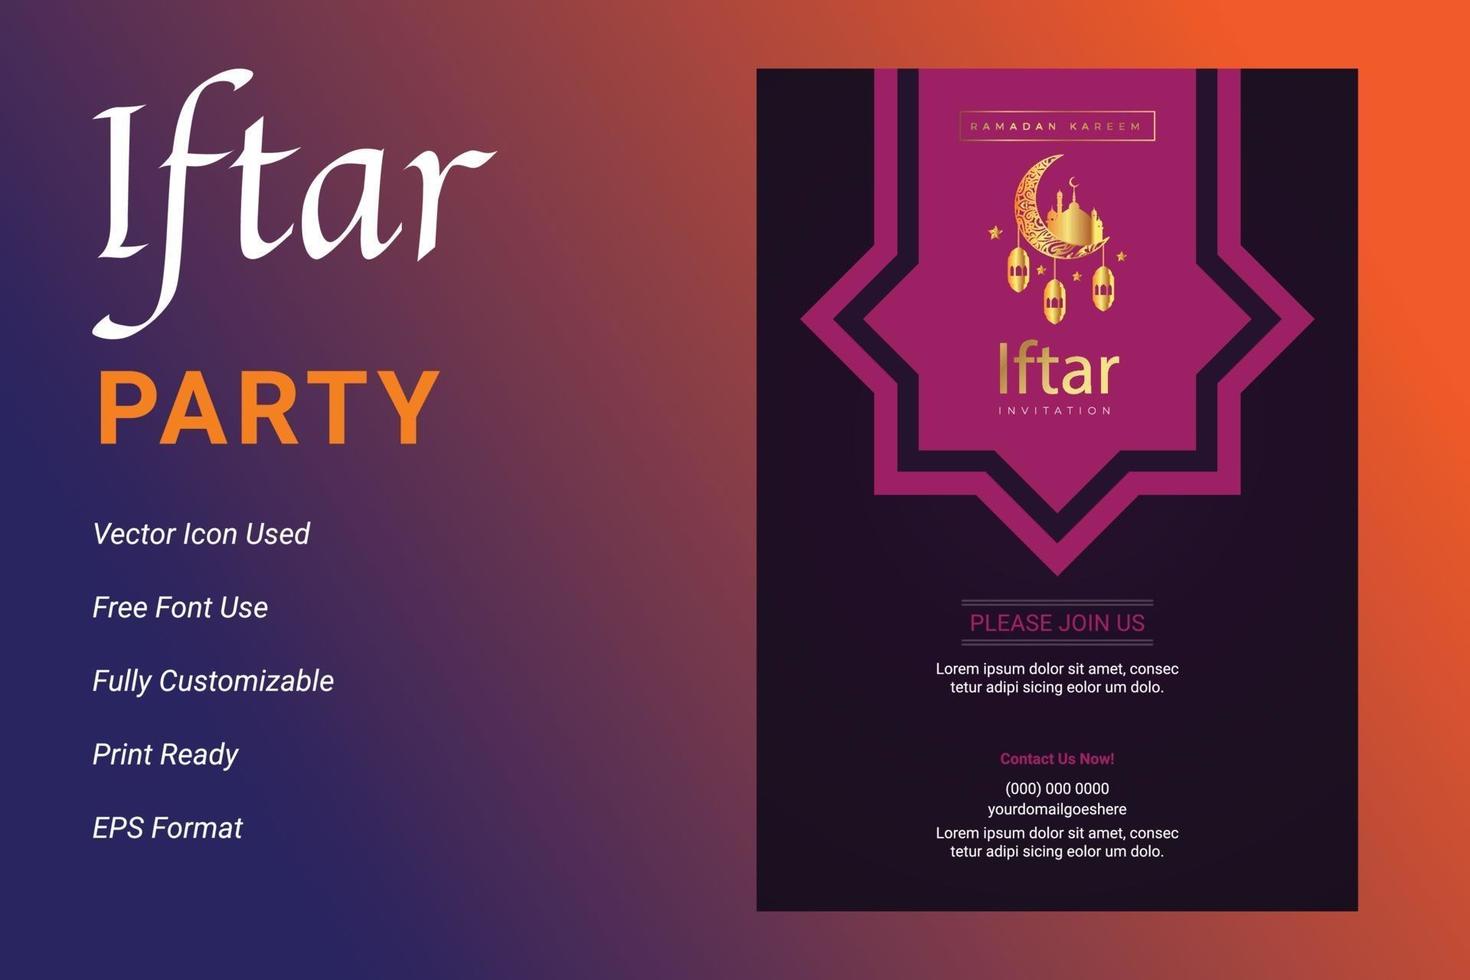 Ifter Party invitation flyer design. Ramadan flyer for ifter party vector